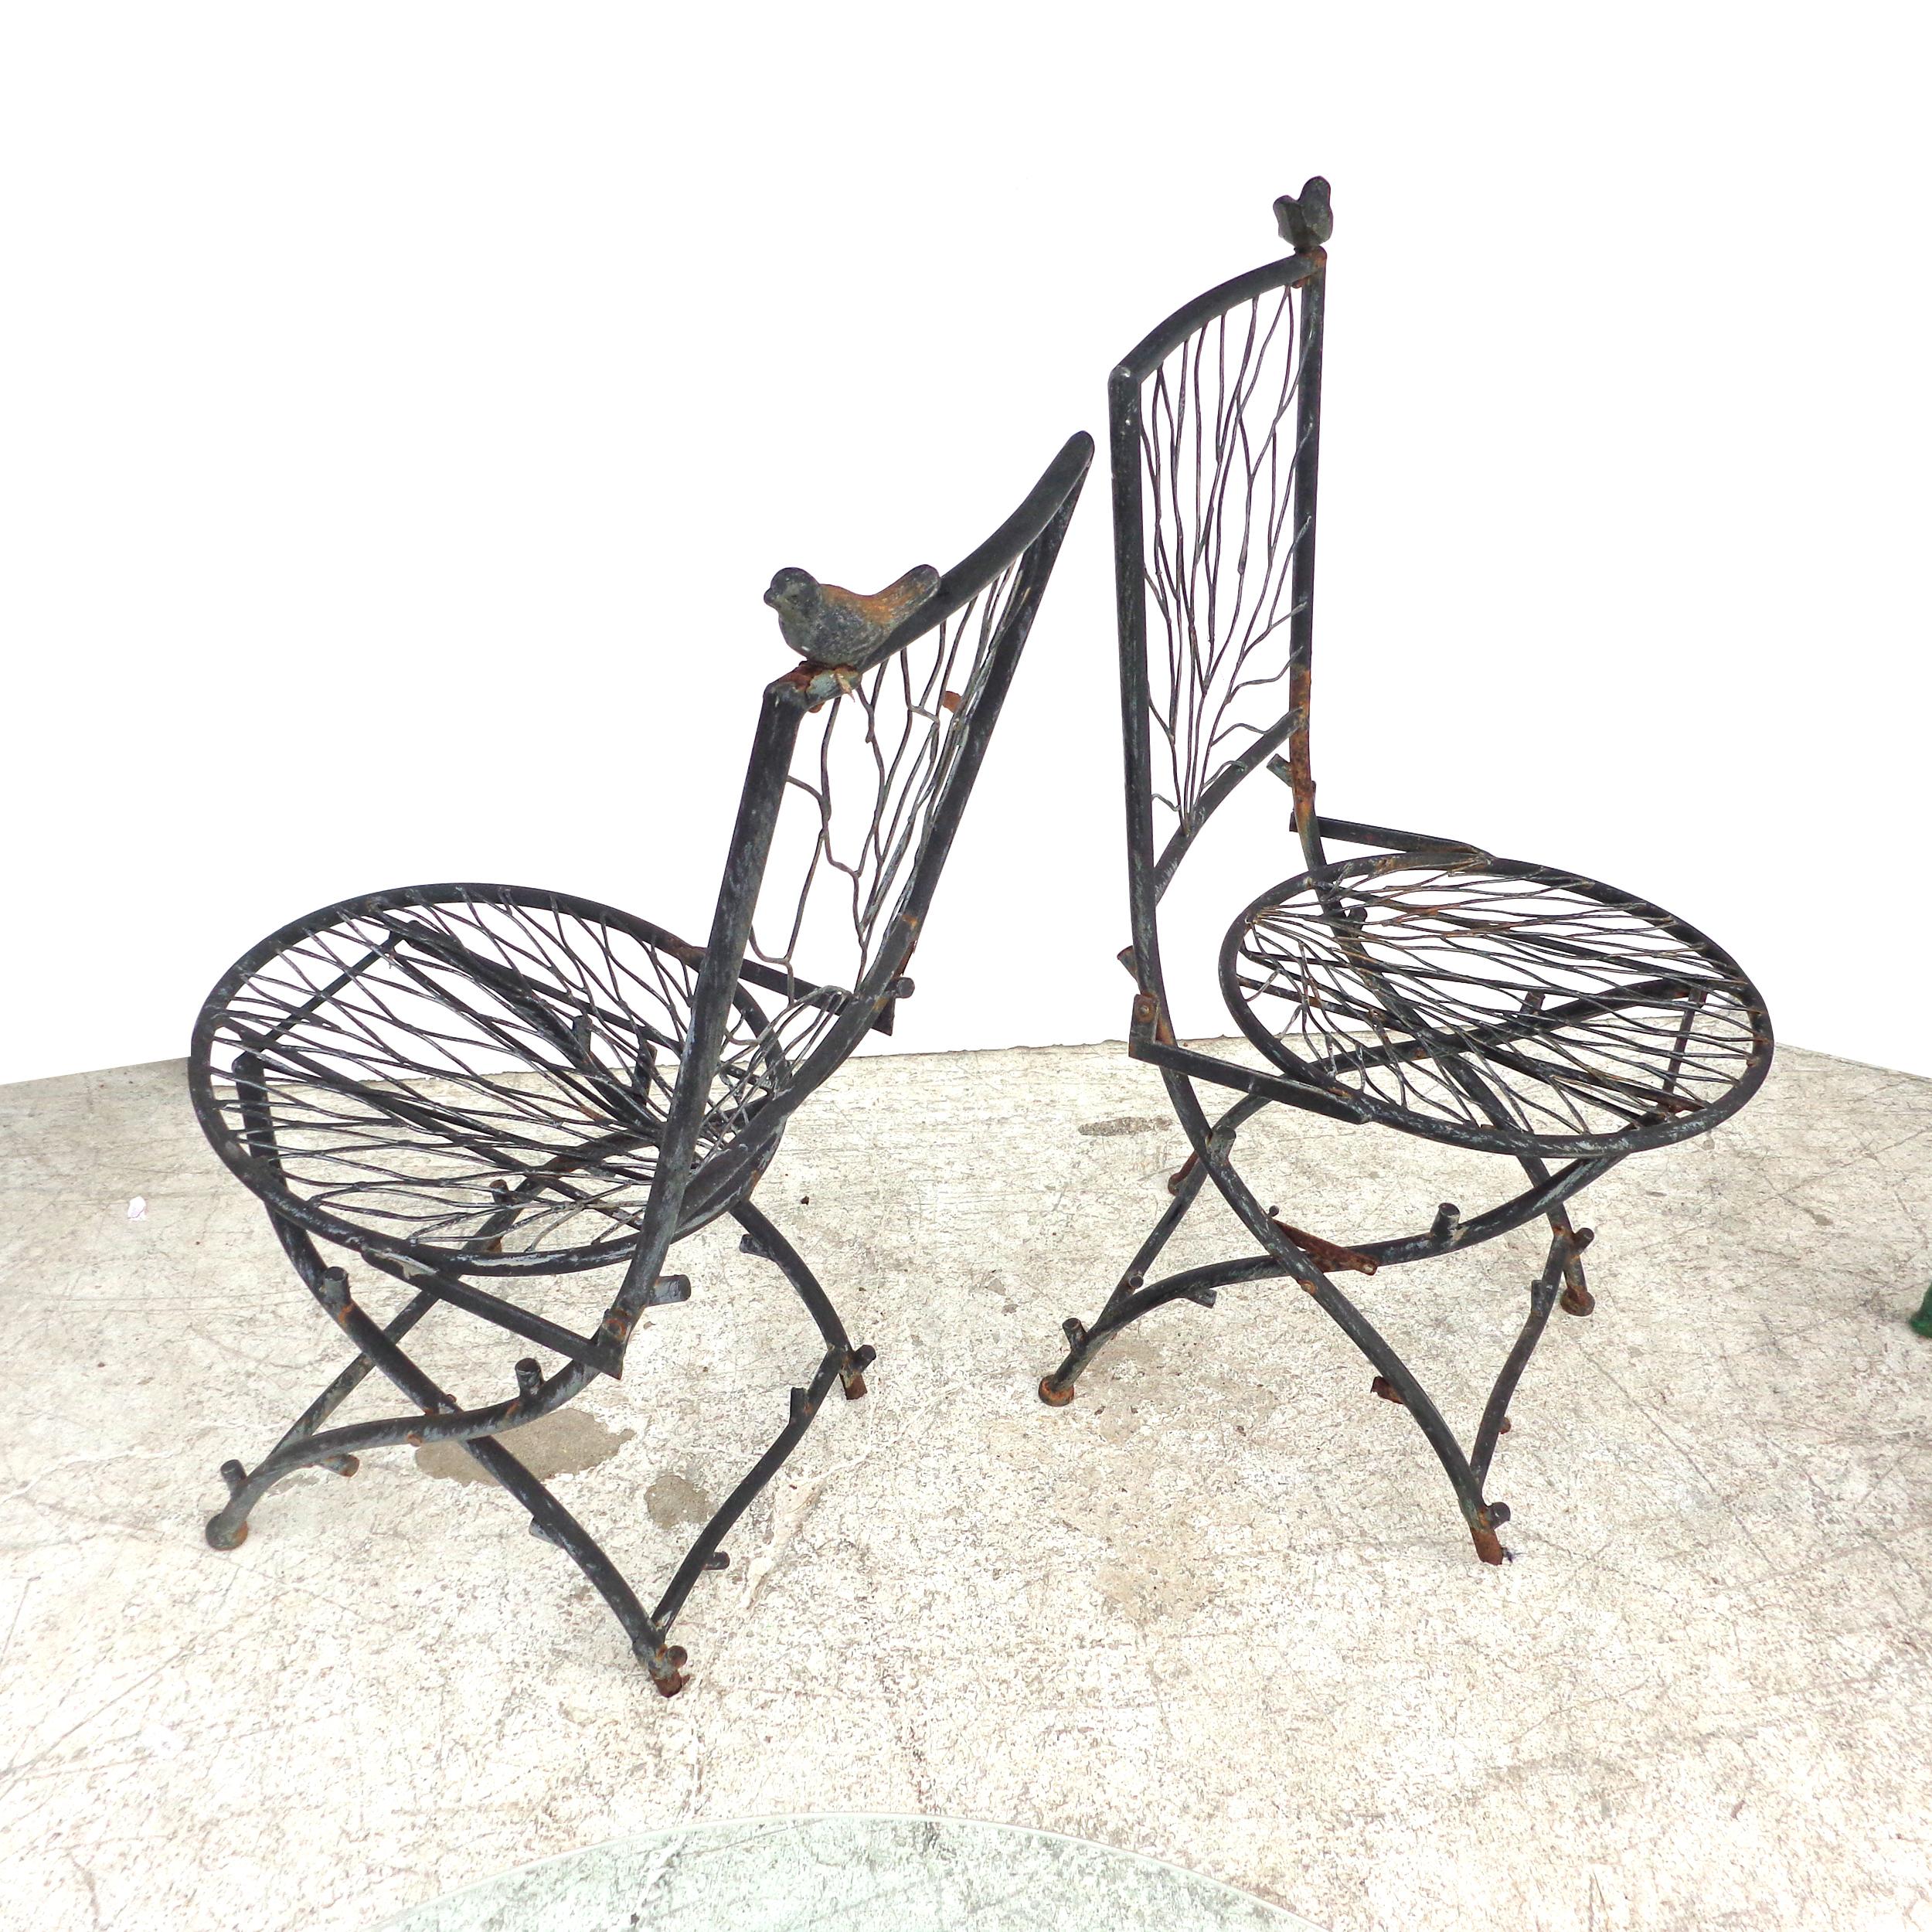 Set of Outdoor Giocametti Style table and chairs

In the manner of Diego Giacometti, this charming patio table and chairs would fit in any indoor or outdoor setting. The chairs fold for easy l
storage and the table is topped with glass.




